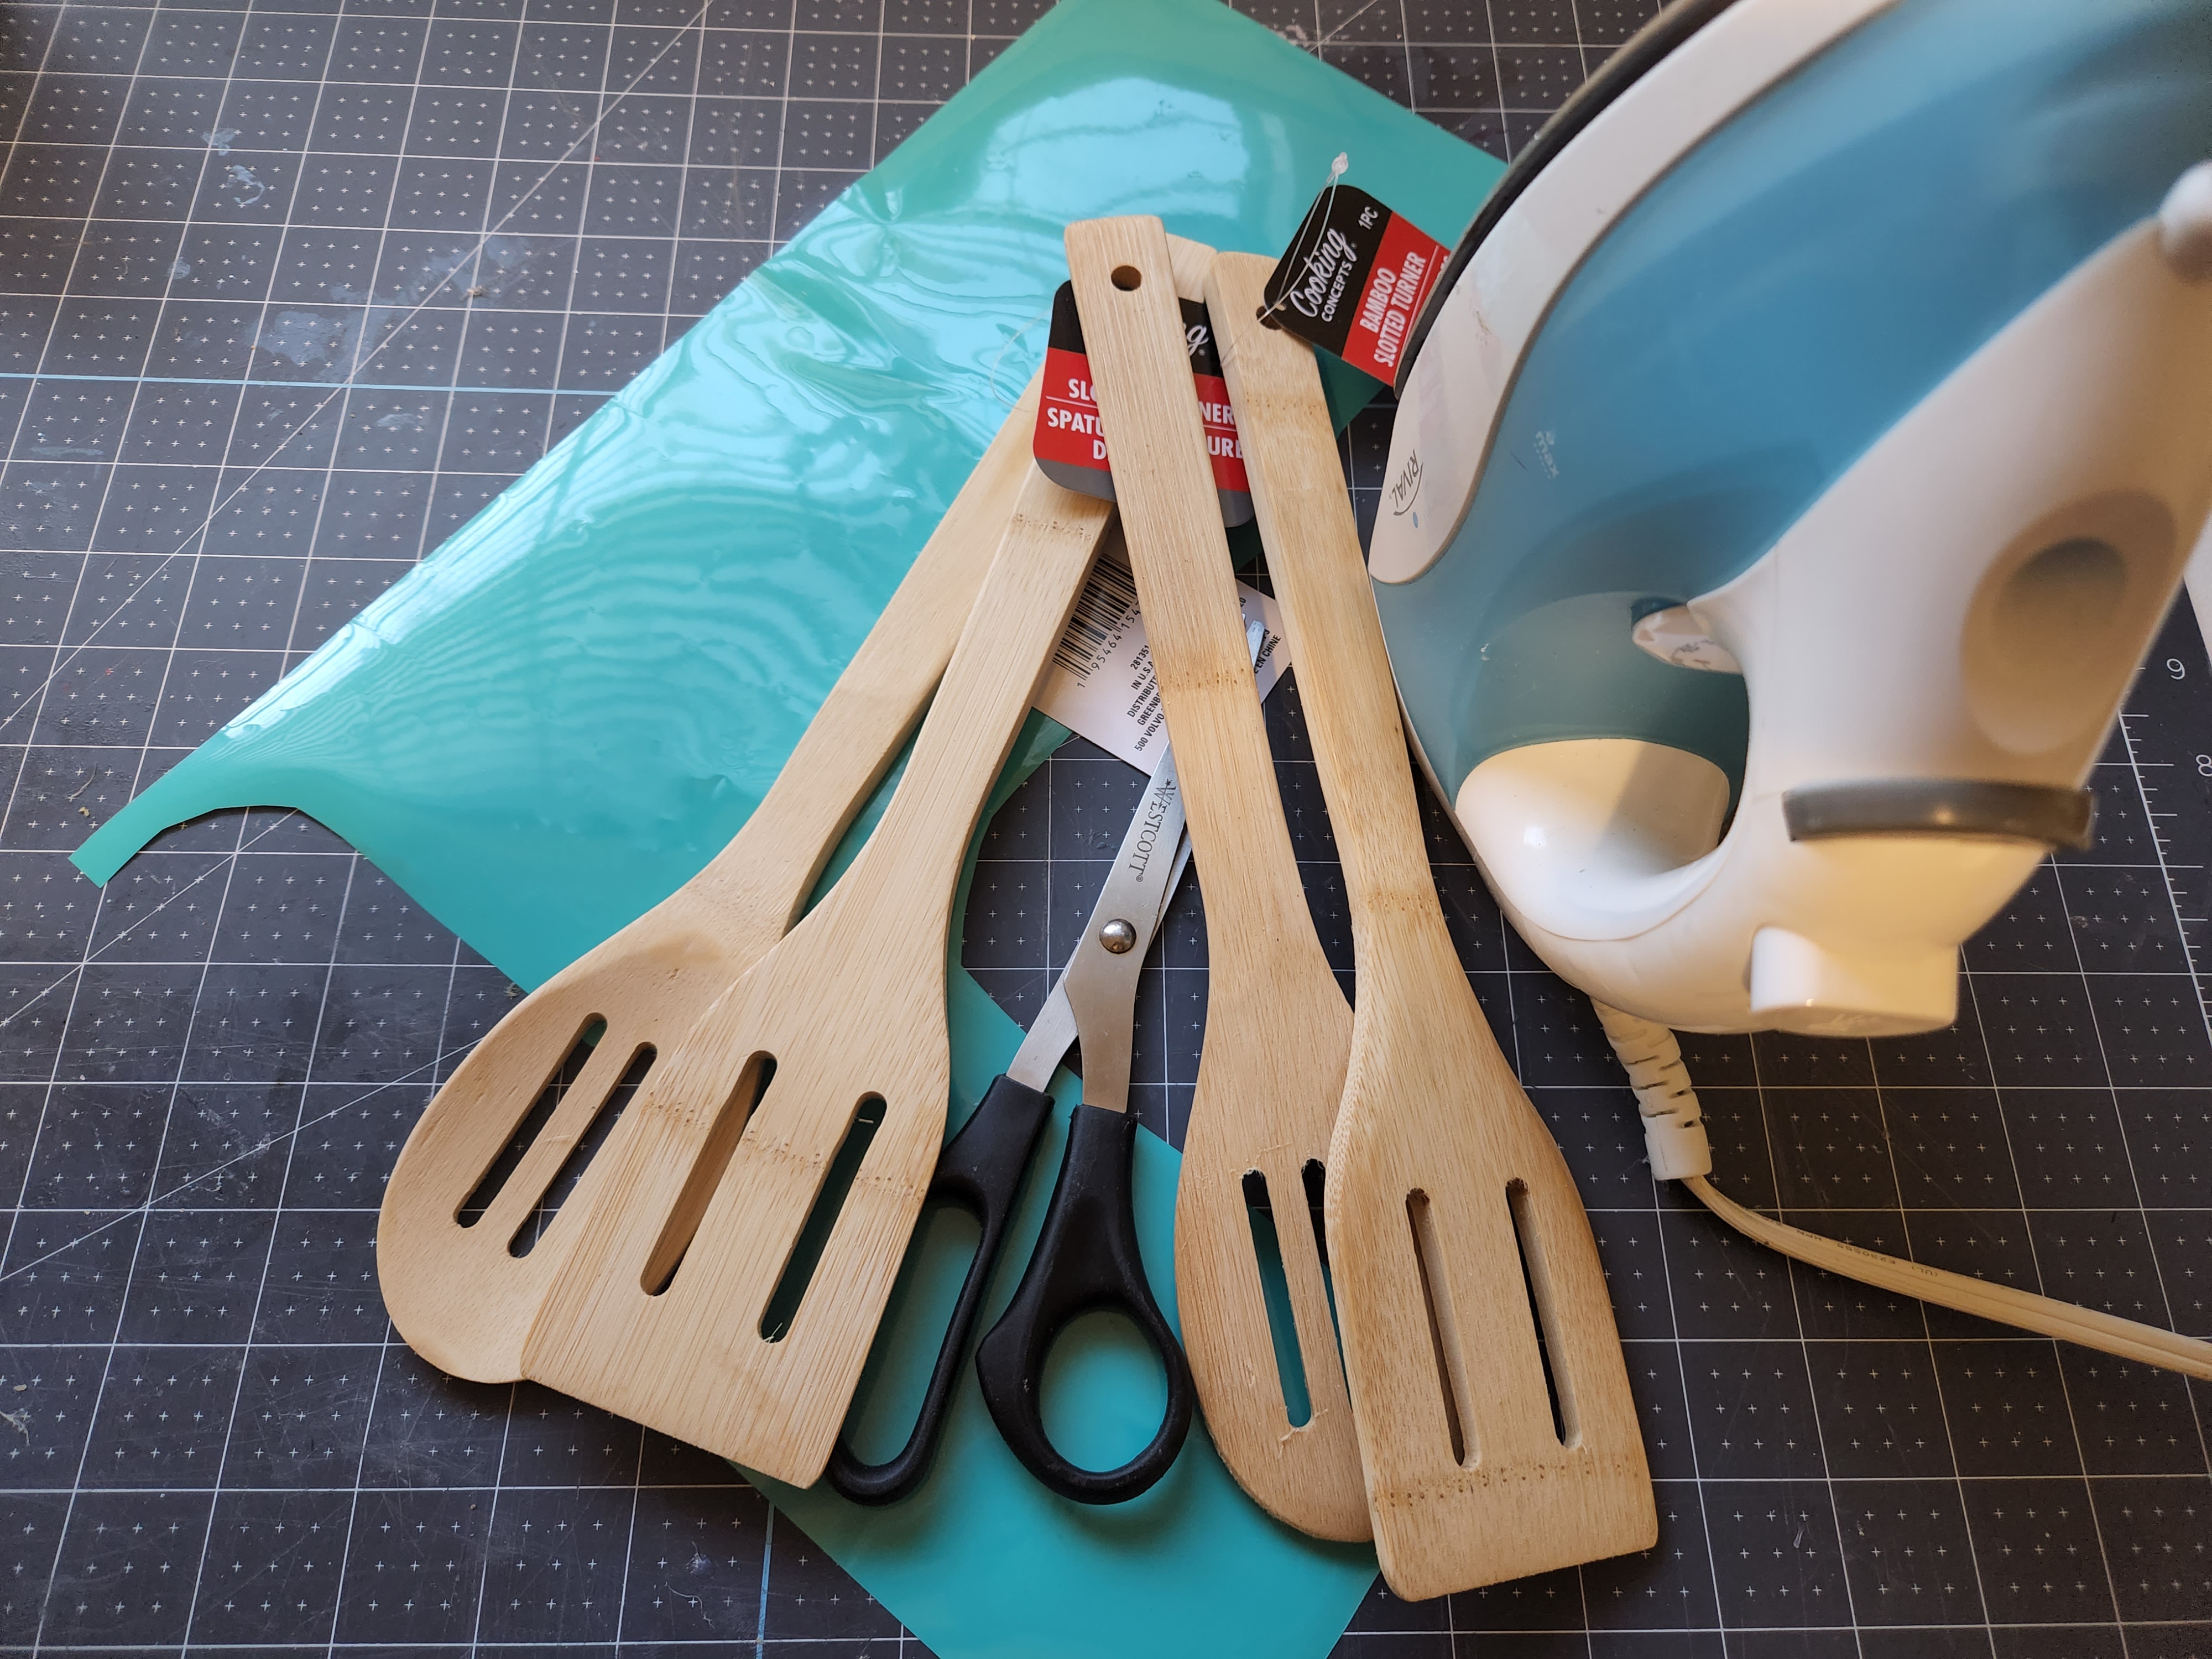 Supplies for an etched wood spoon: wood spoons or spatulas, scissors, a dremel, or an iron and heat transfer vinyl.